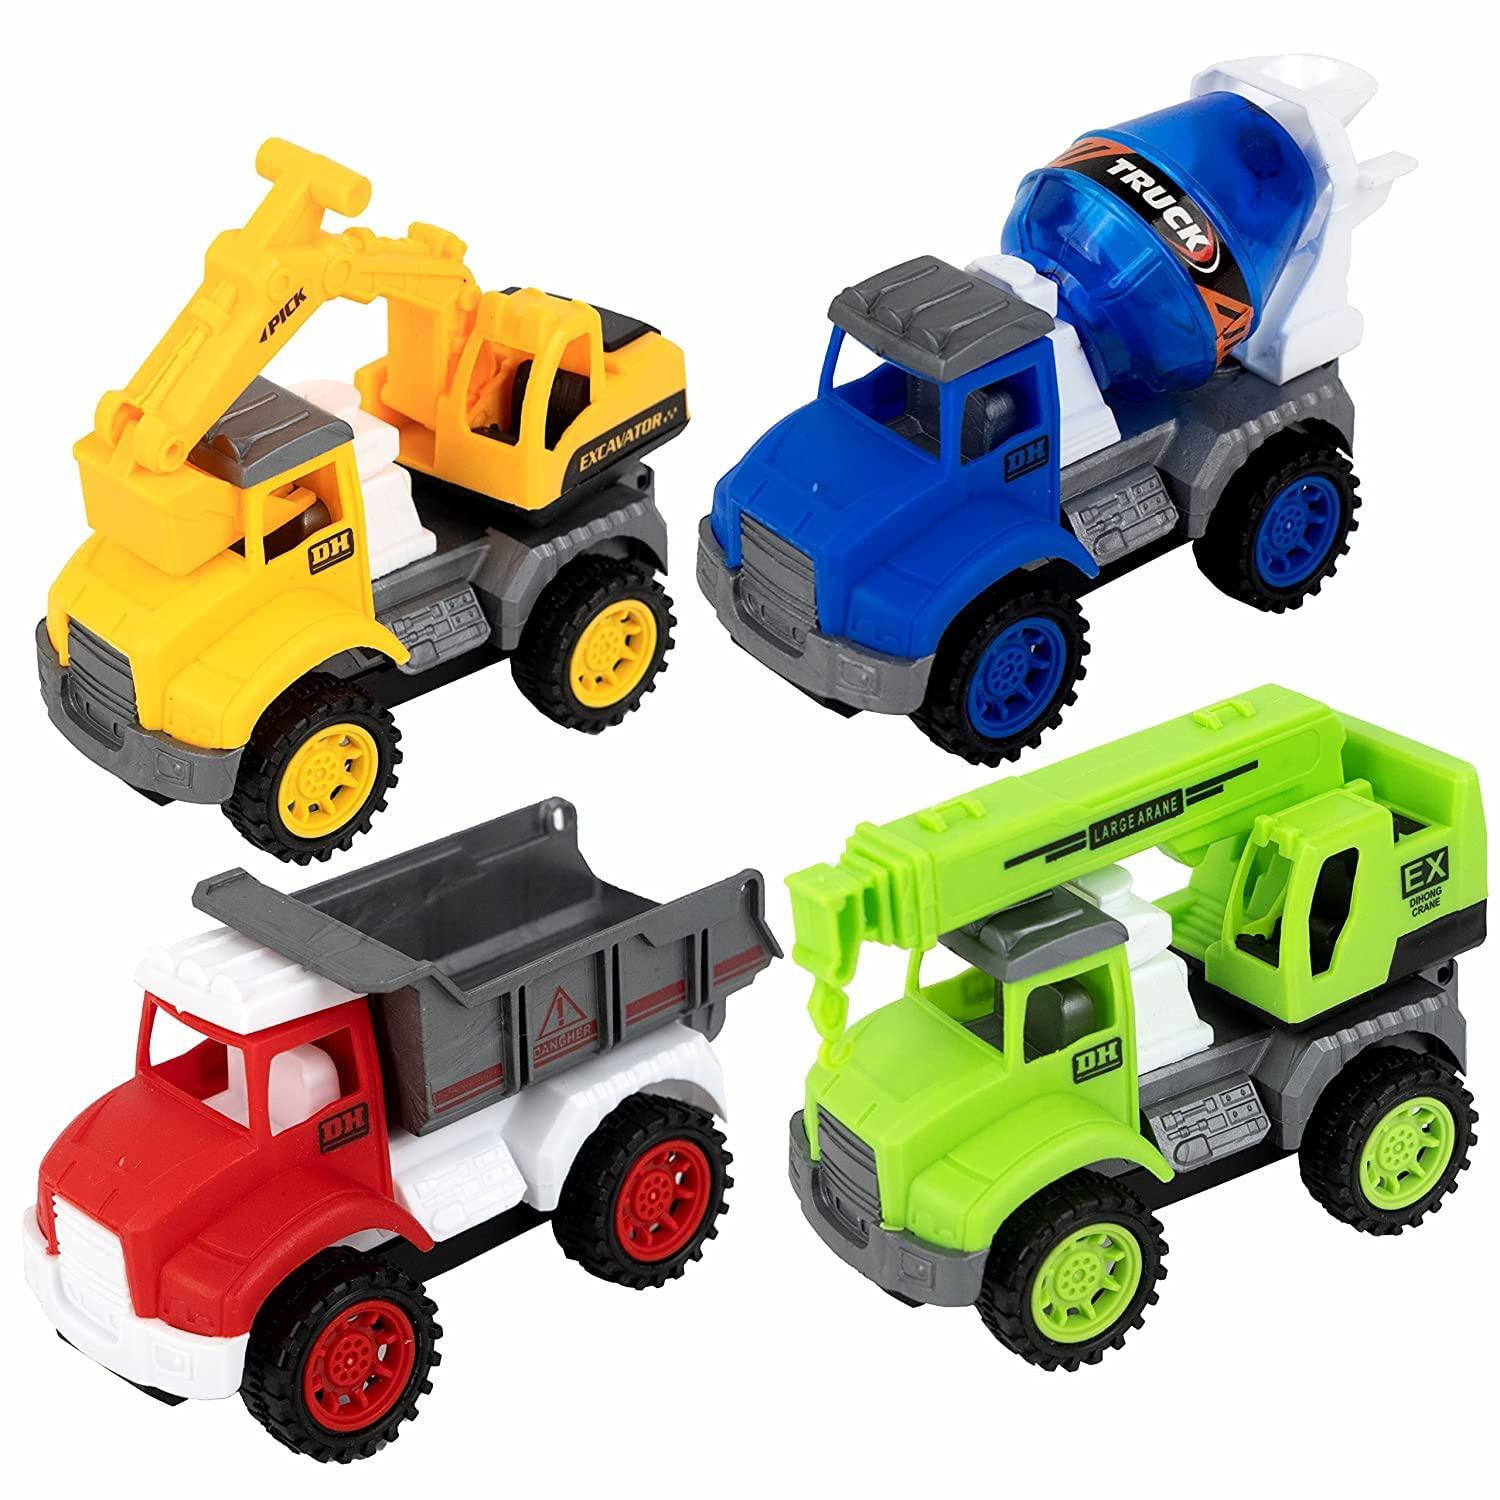 Brand Conquer City Server Dump Vehicle Friction Powered Construction Trucks Excavator Toys Crane Truck Toy - BumbleToys - 3+ years, 5-7 Years, Boys, New Arrivals, Toy Land, Vehicles & Play Sets